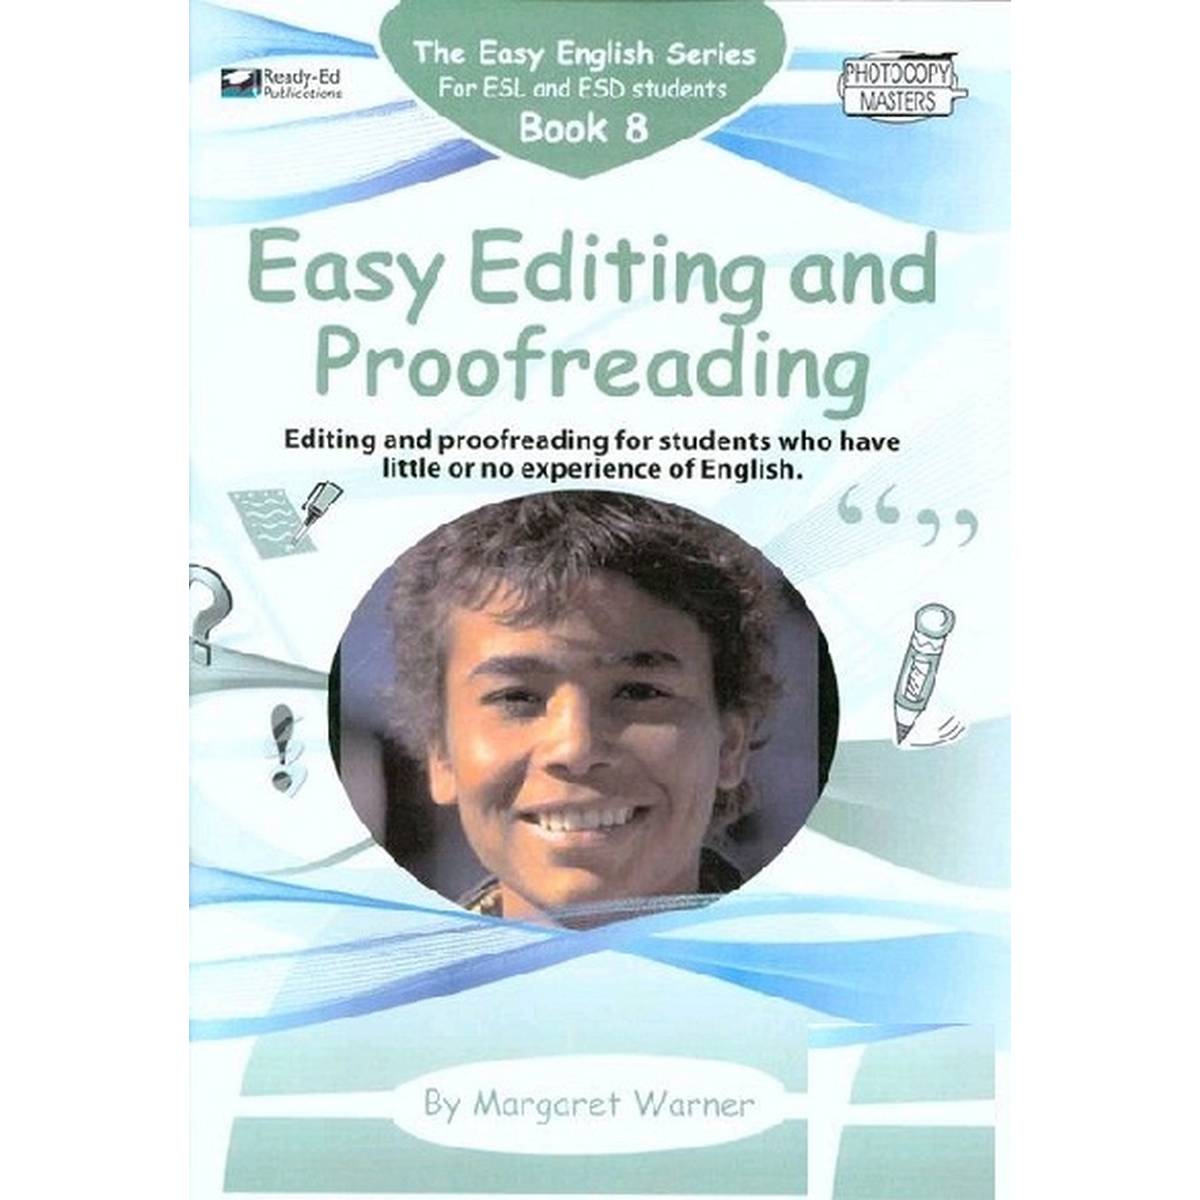 Easy English Series Book 8 Easy Editing and Proofreading